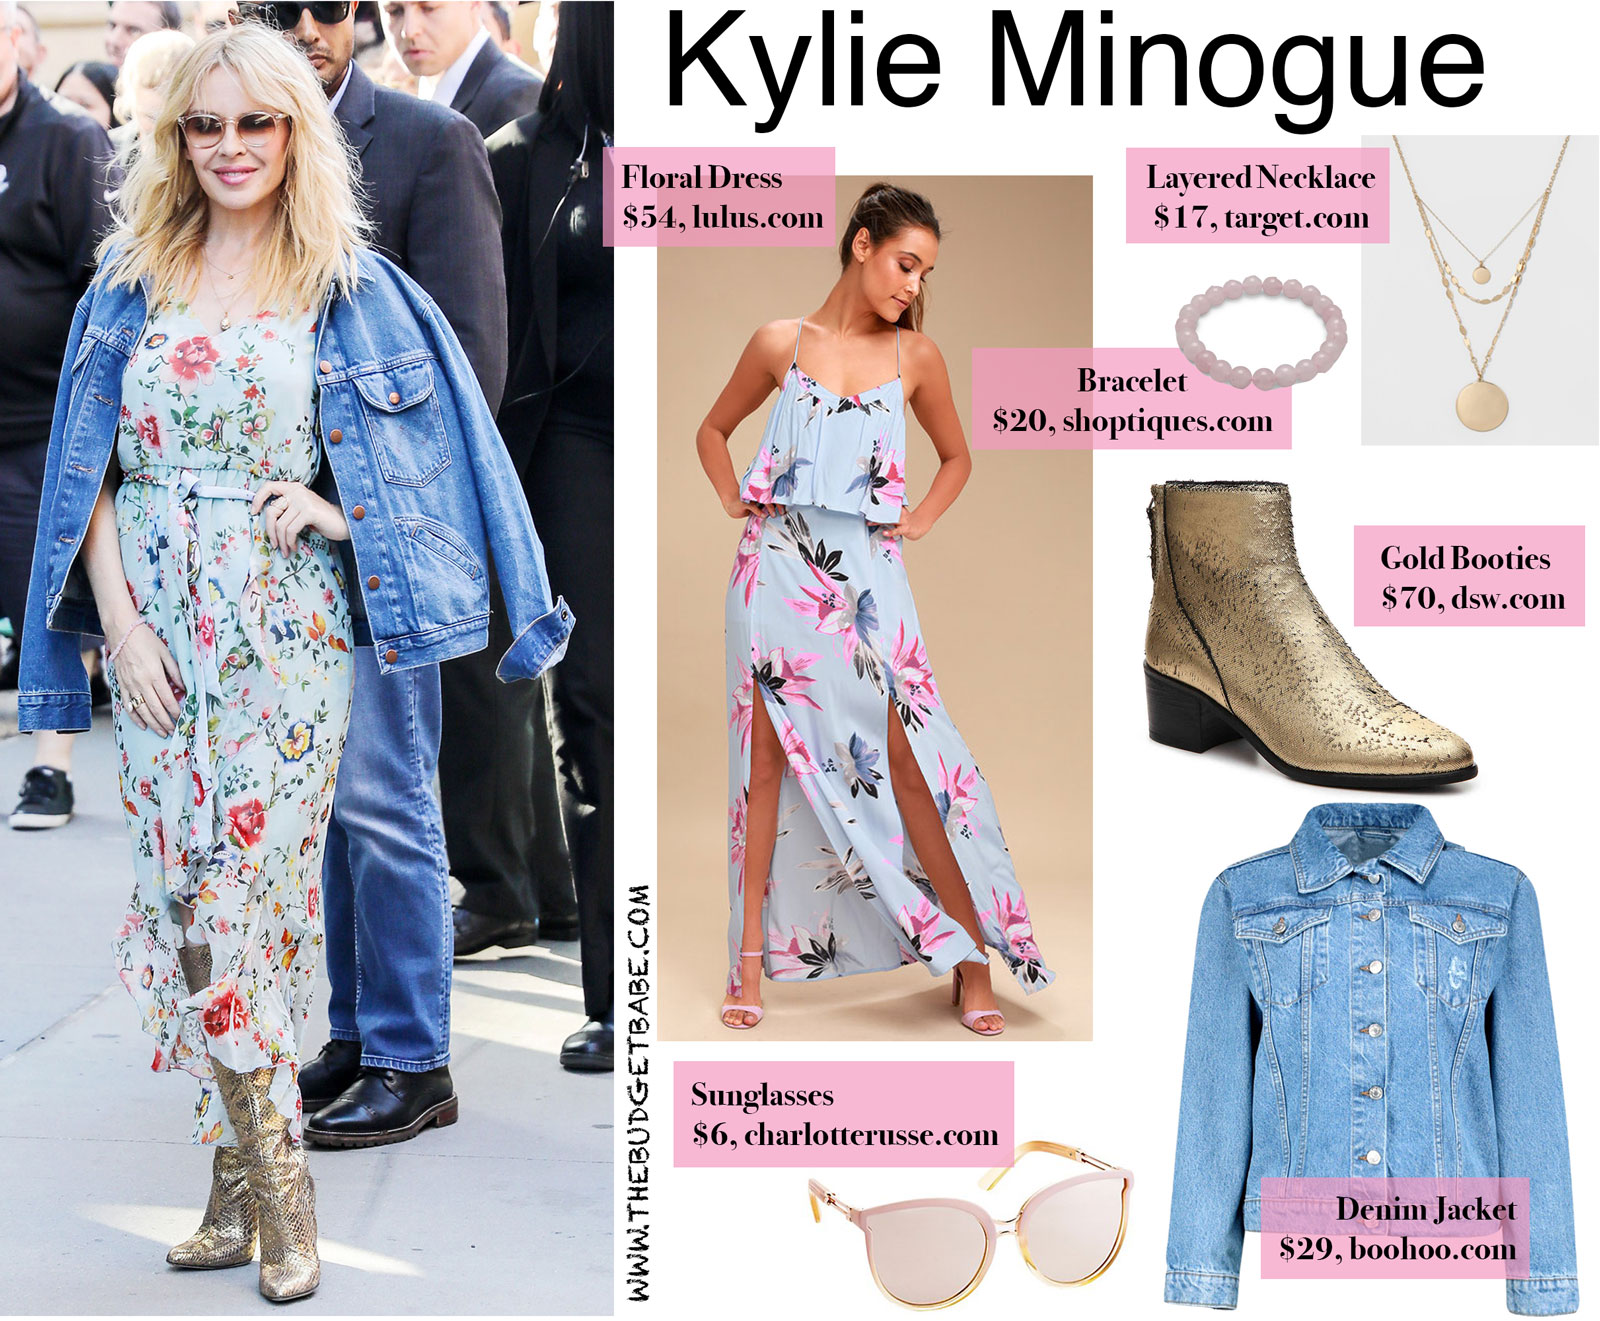 Kylie Minogue's Floral Dress and Gold Boots Look for Less